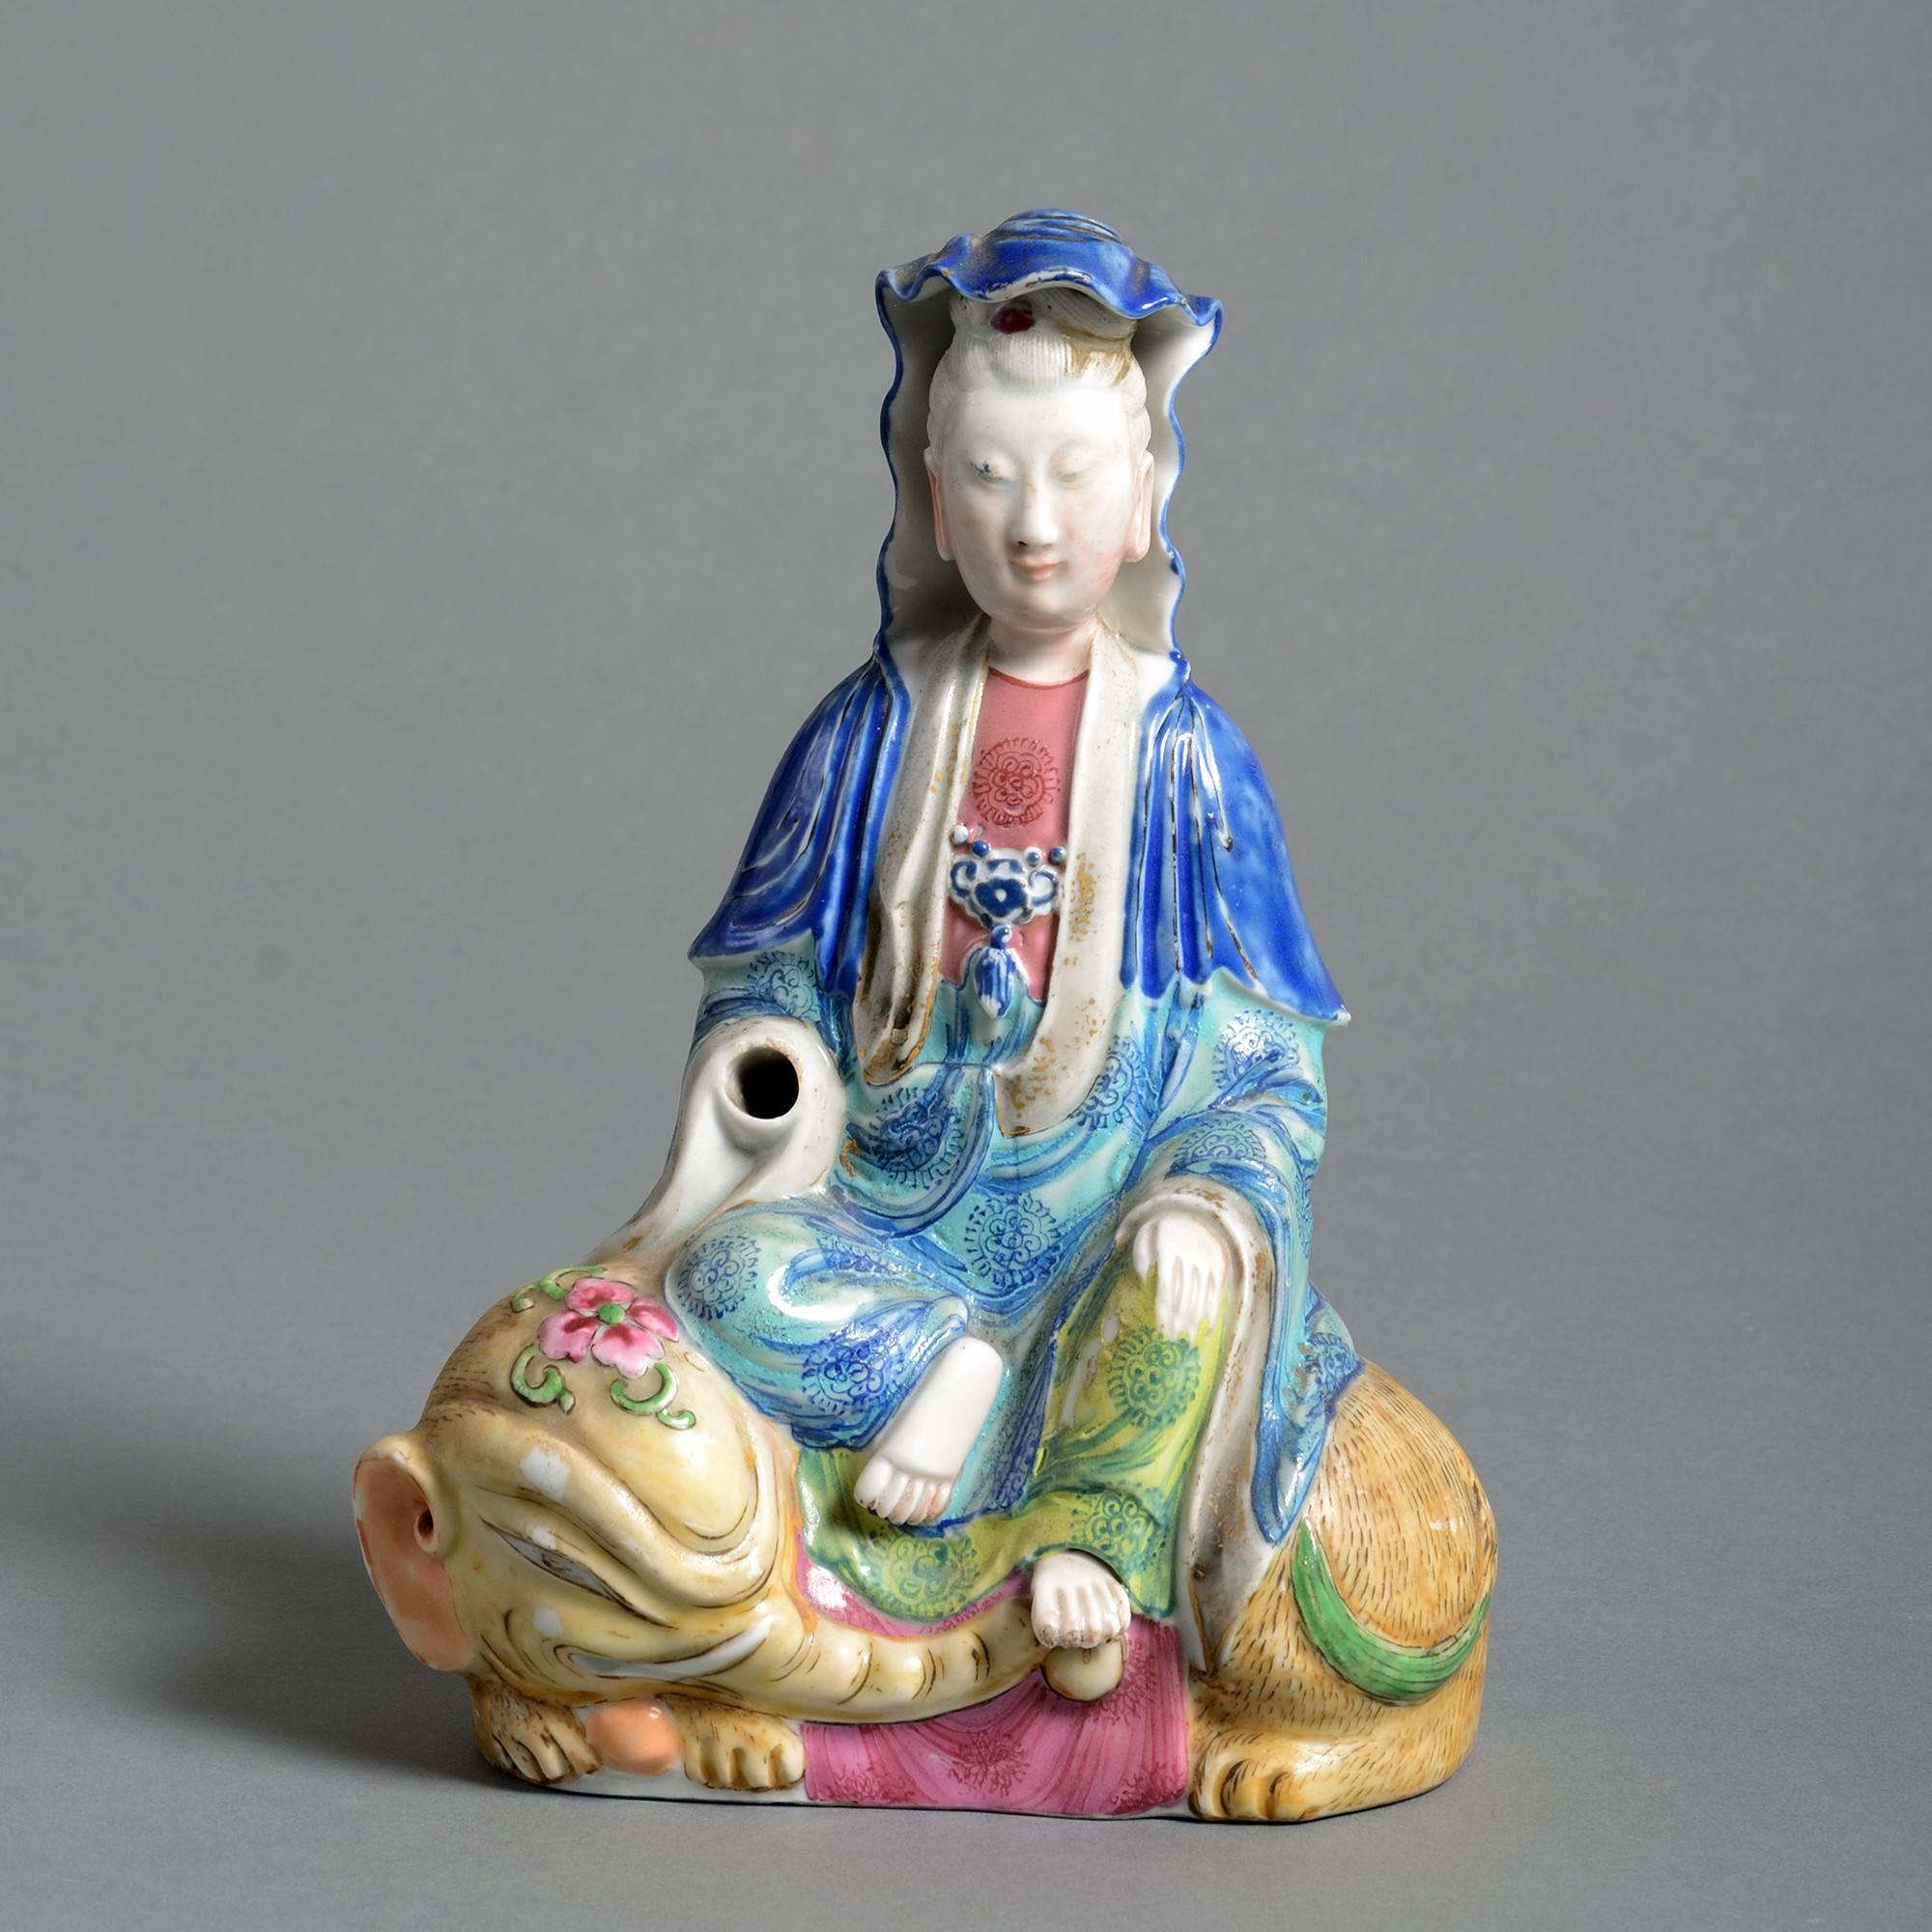 A late 19th century polychrome porcelain figure, depicted seated upon a recumbent elephant. 

Qing dynasty, Tongzhi period (1861-1875). 

Condition: Good, but missing one hand.